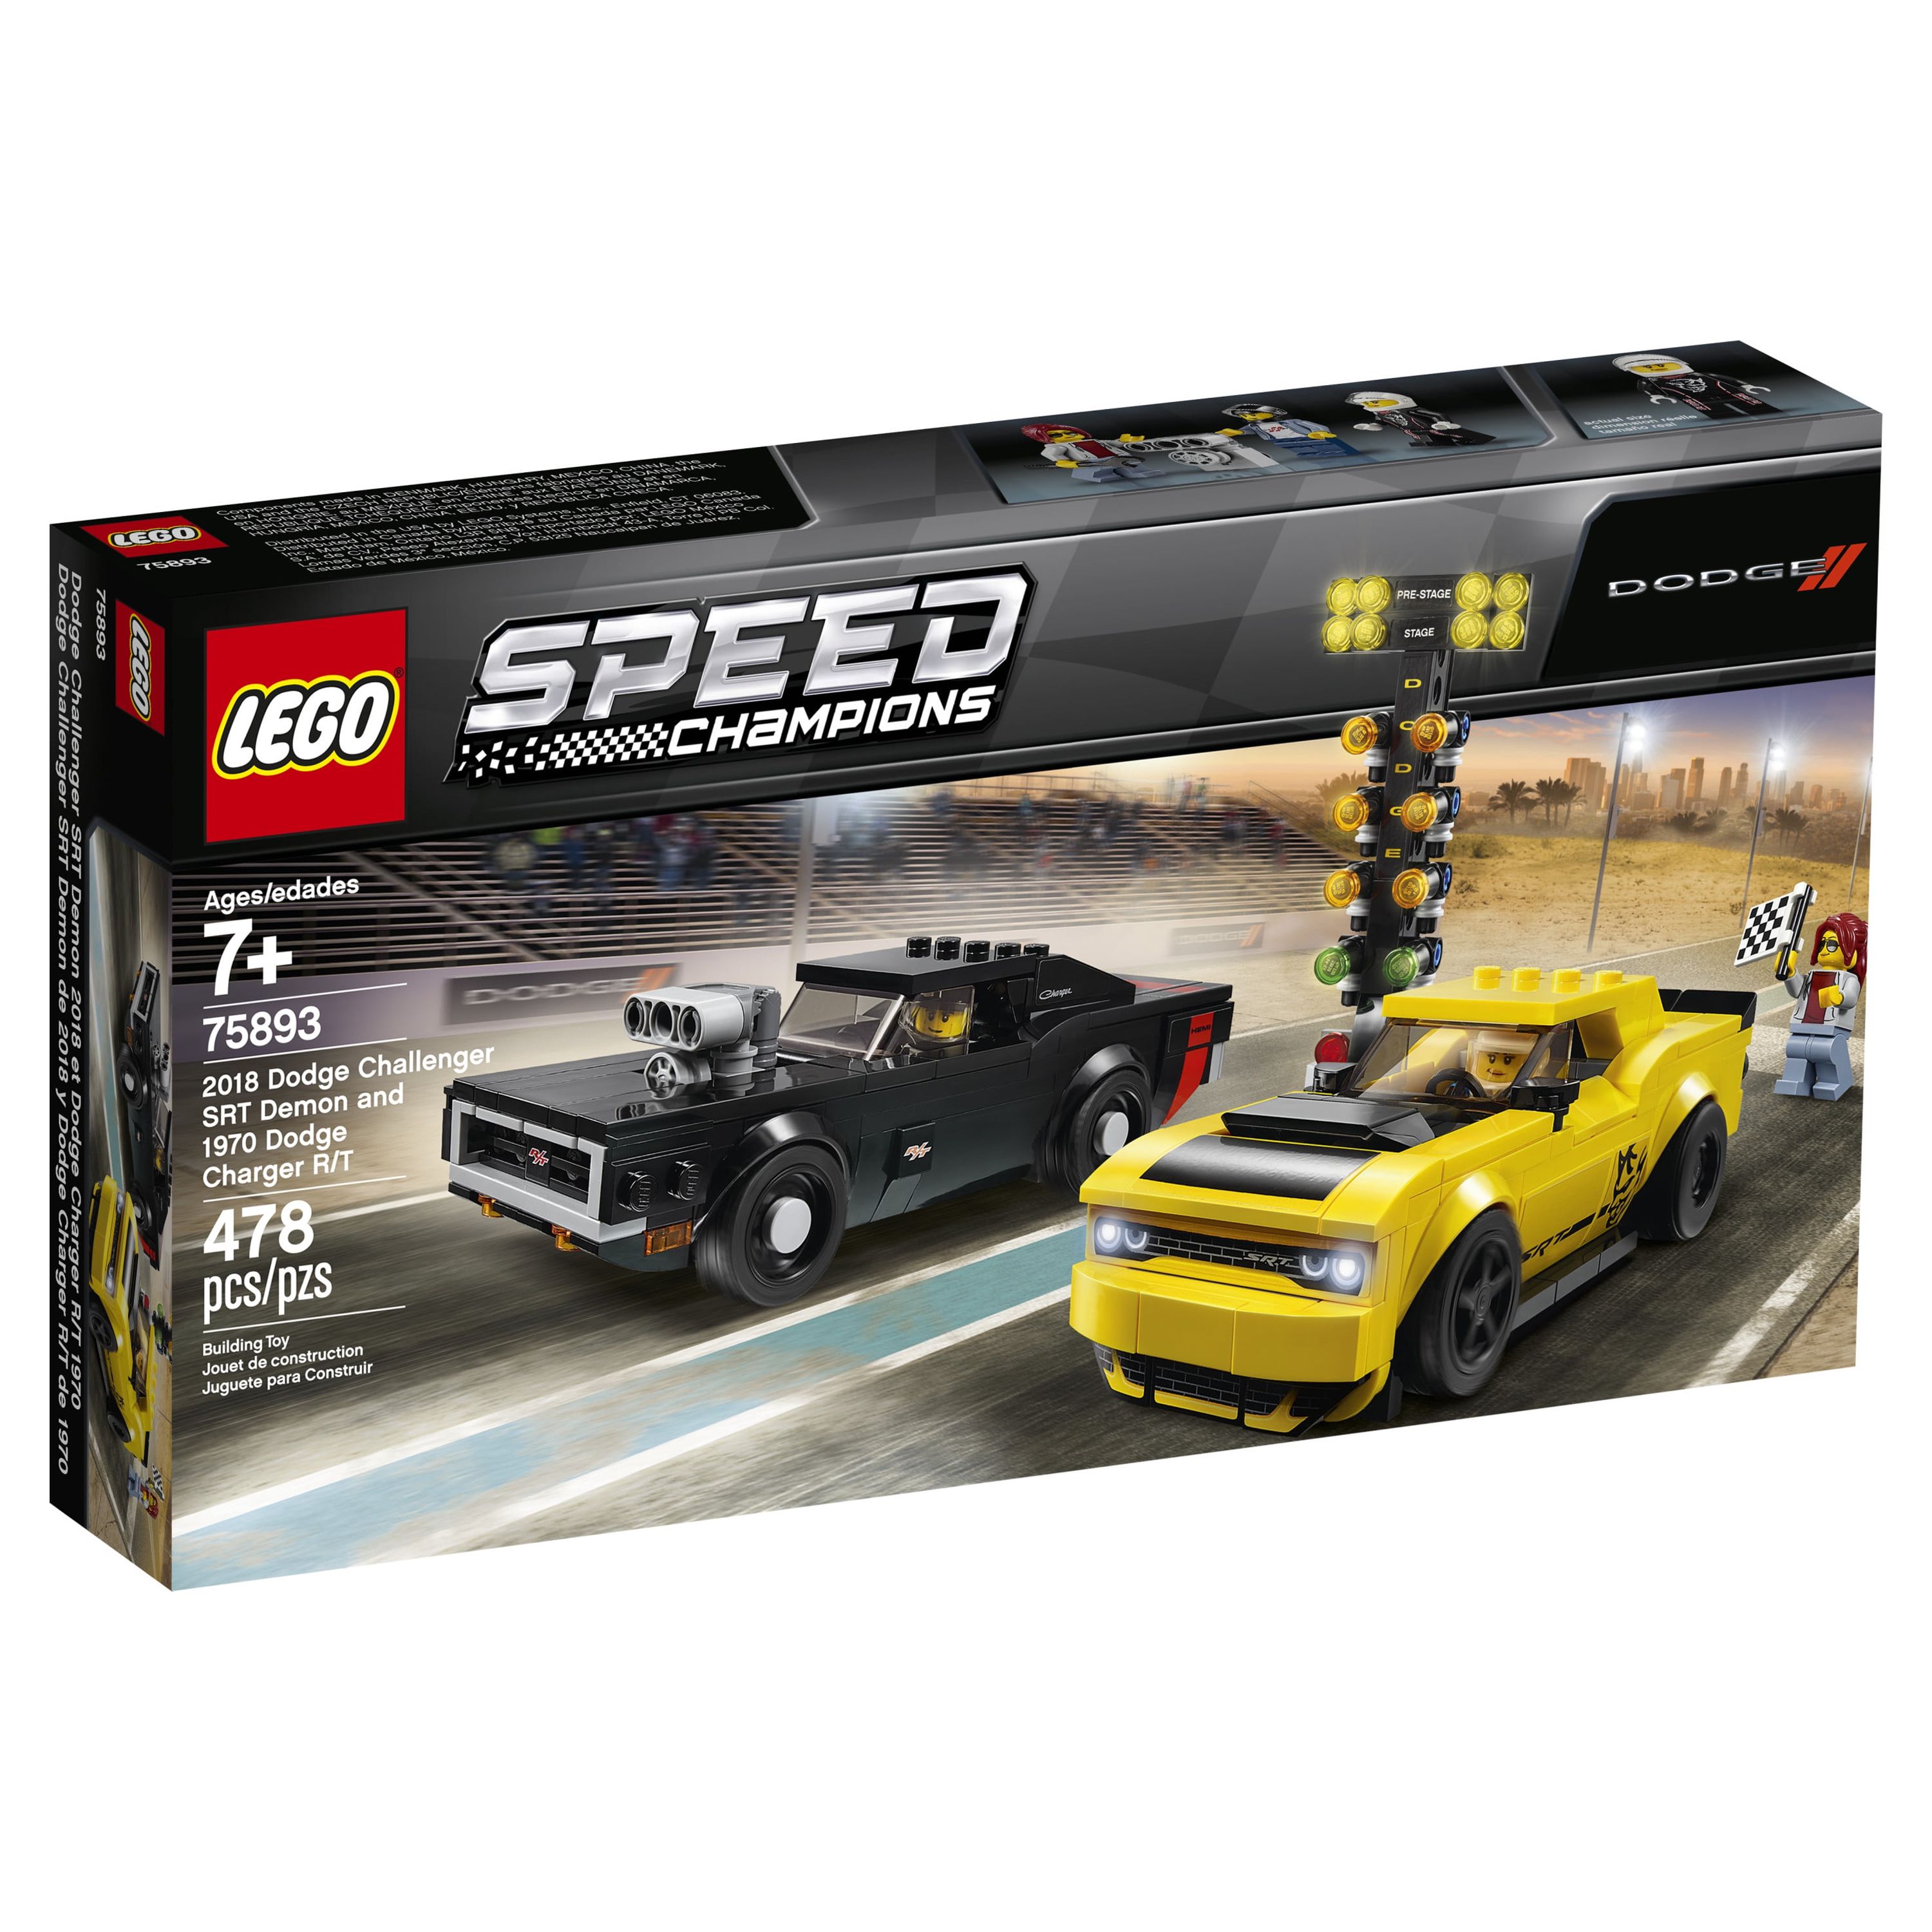 LEGO Speed Champions 2018 Dodge Challenger SRT Demon and 1970 75893 Building Car - image 4 of 5